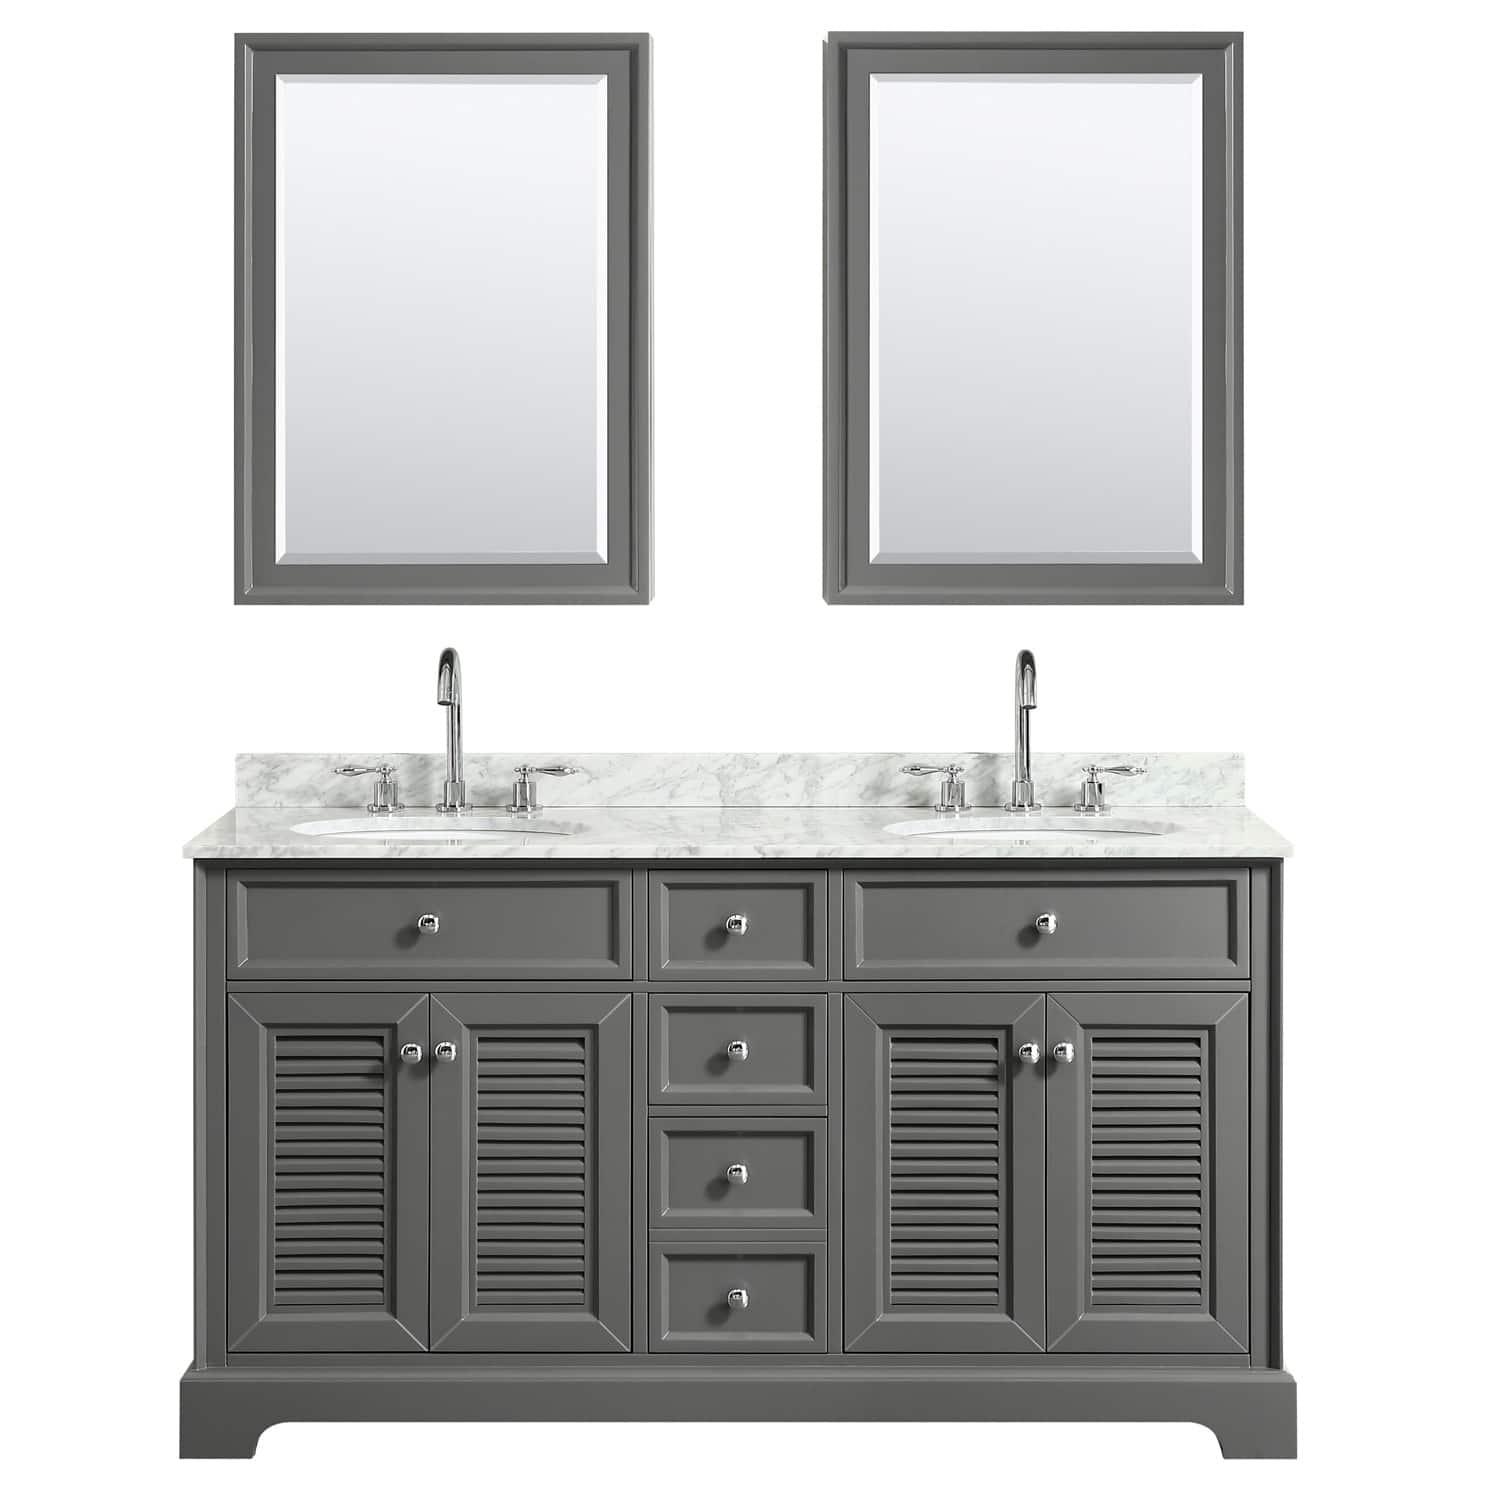 Best Places To Buy Bathroom Vanities / The best place to